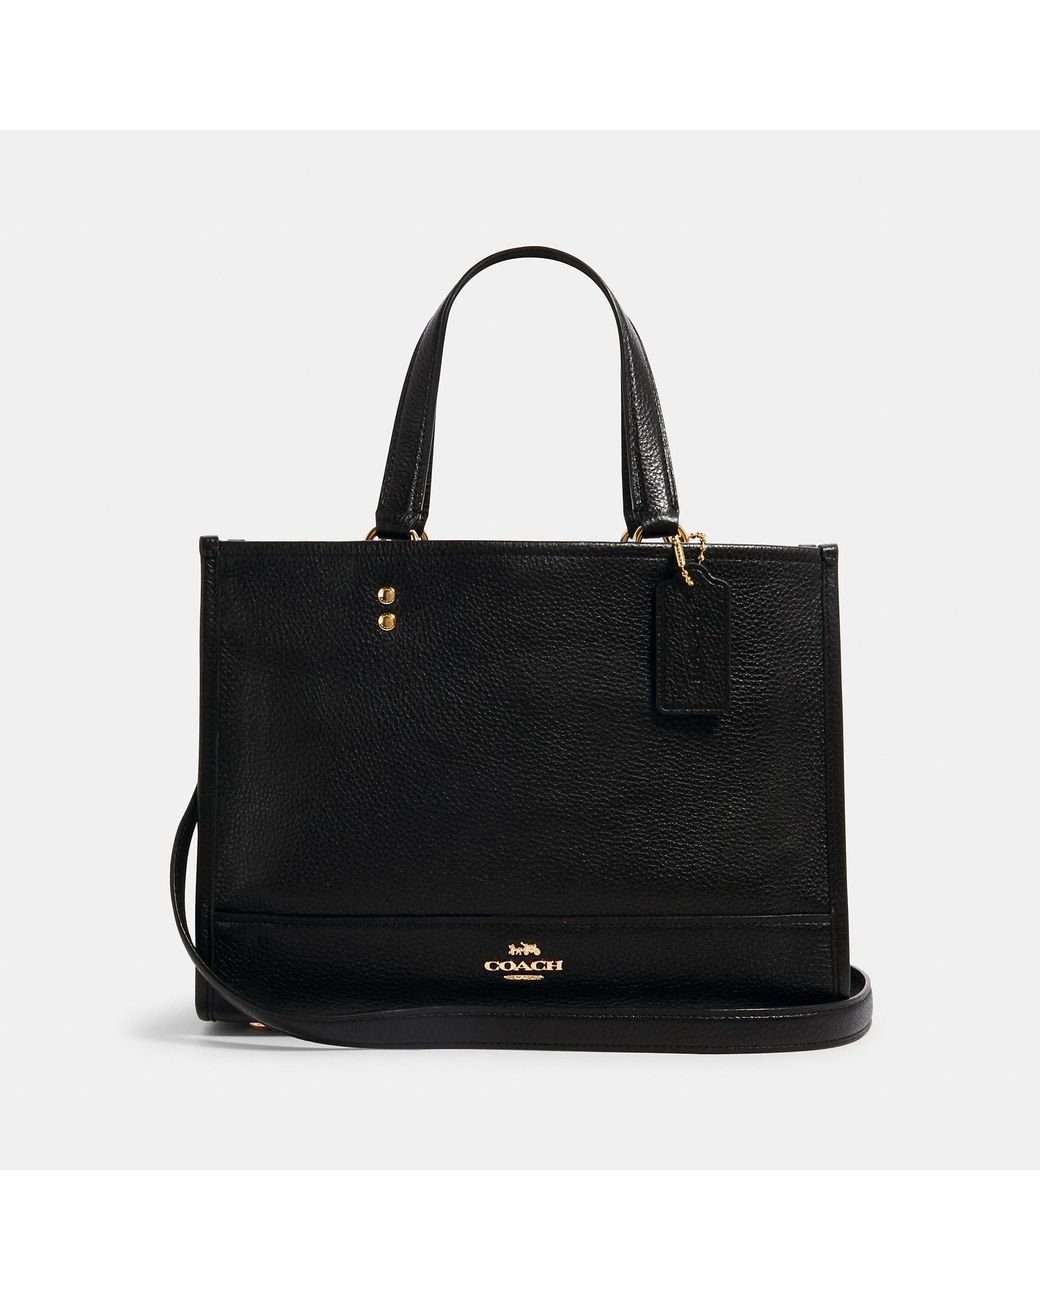 COACH Dempsey Carryall in Black | Lyst